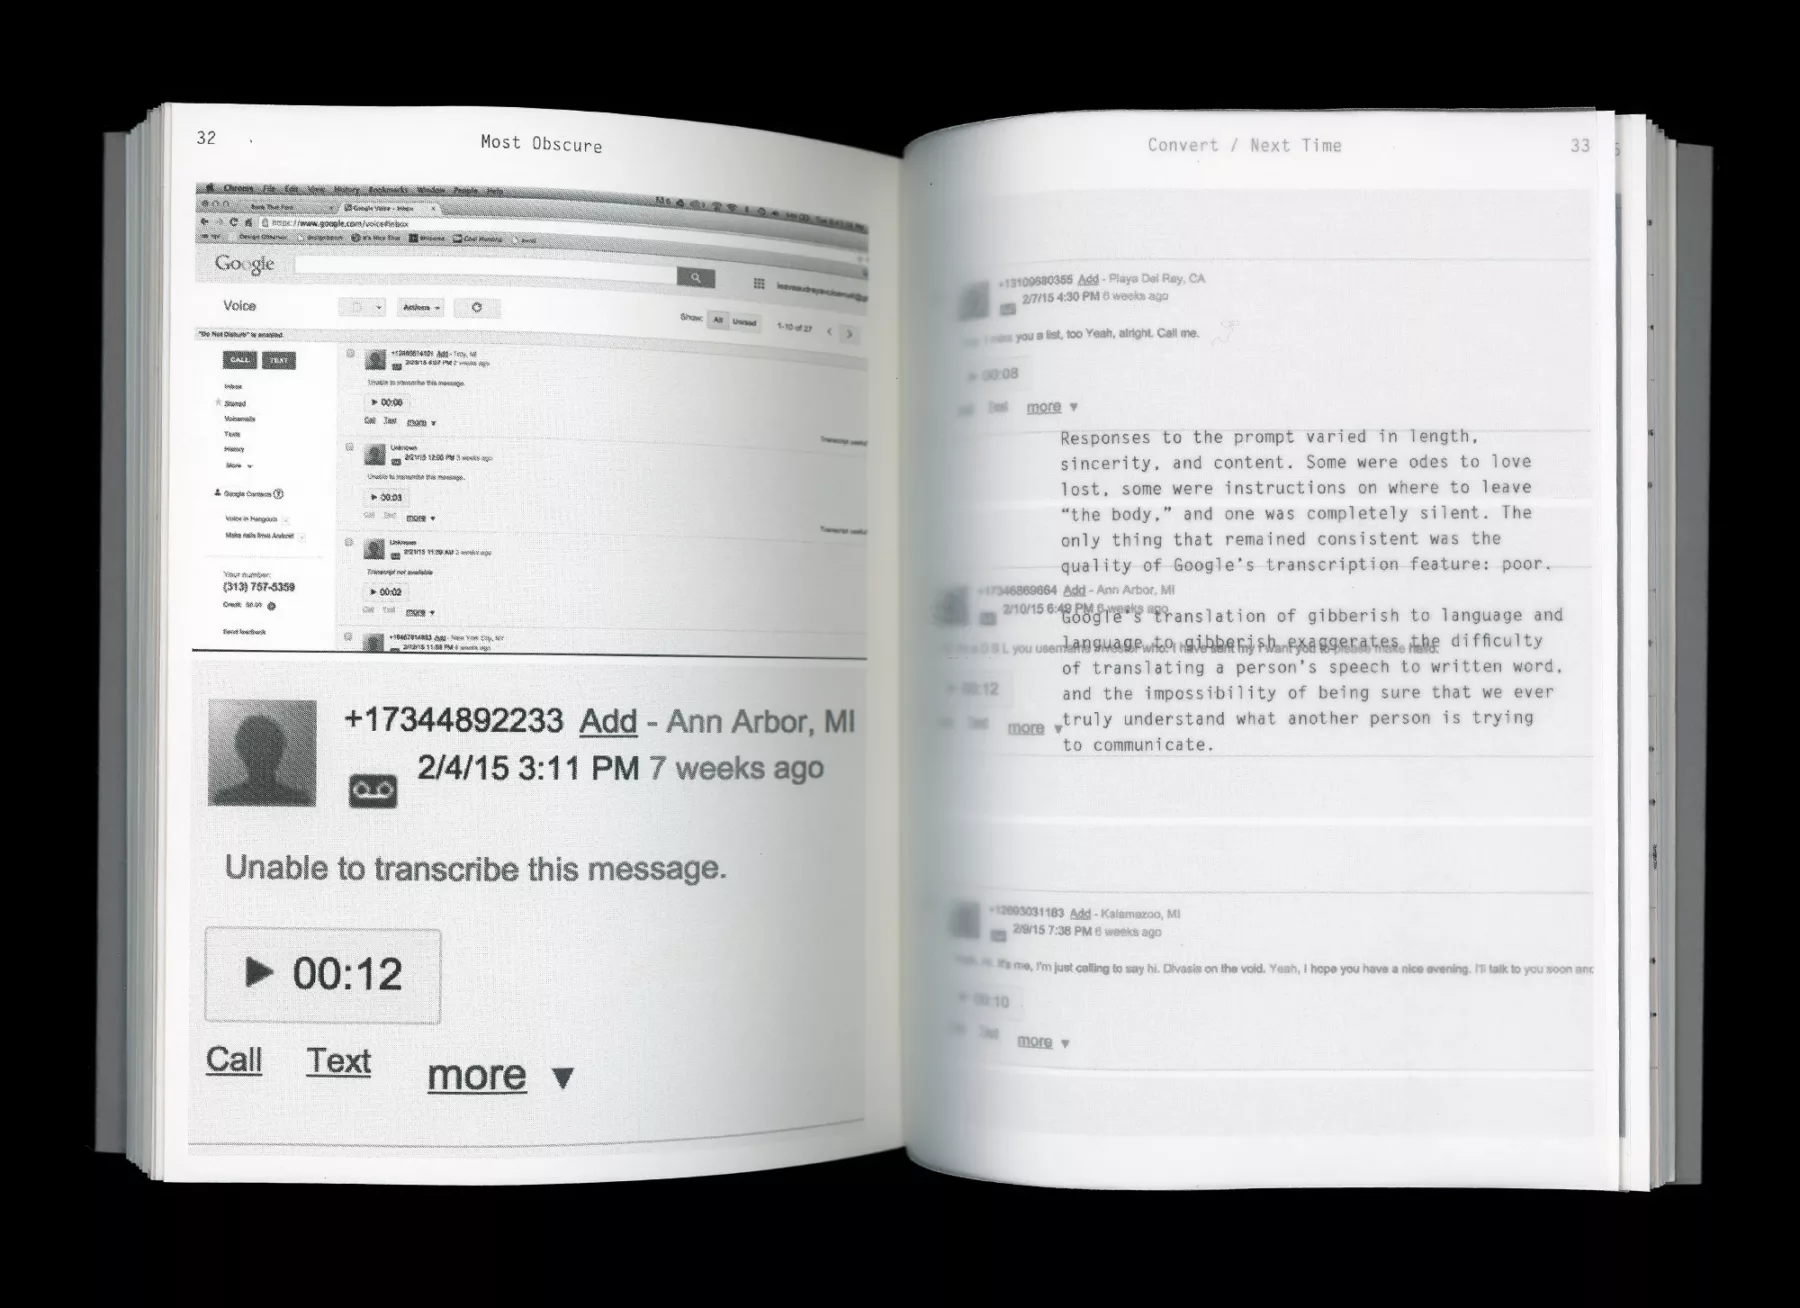 Spread of 'Most Obscure' book showing screenshots of Google Voice transcriptions of voicemails.